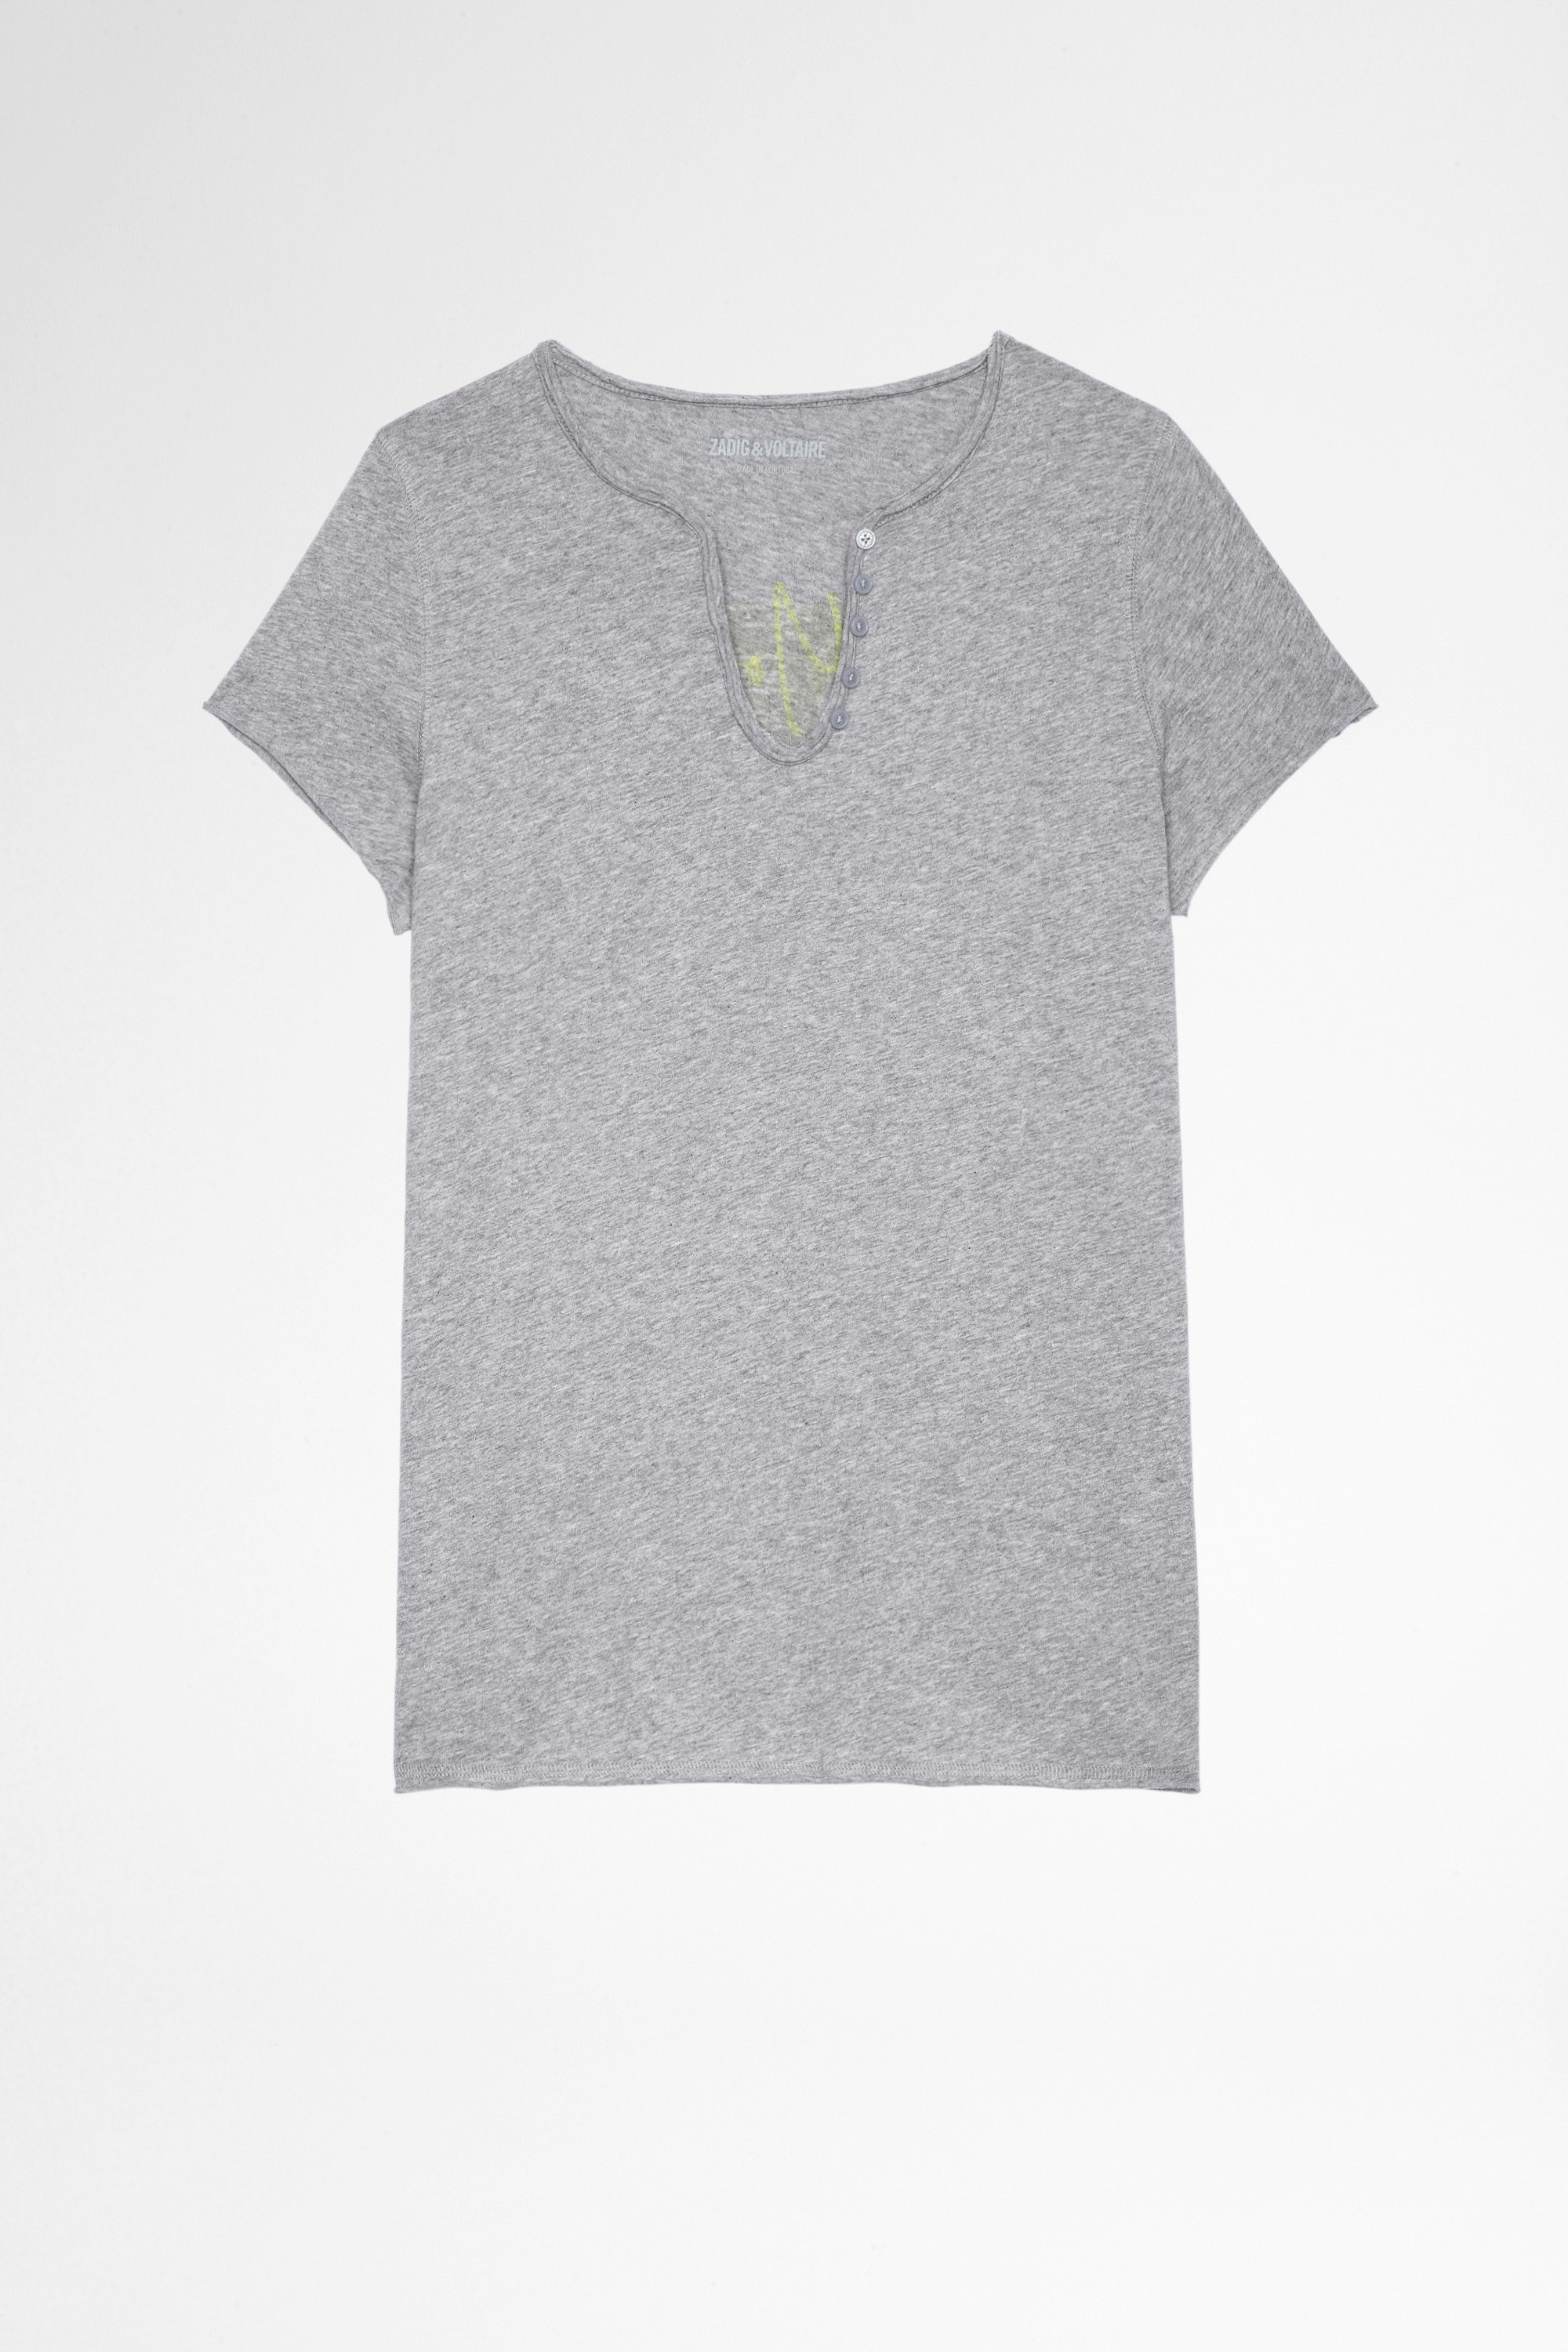 Photoprint Henley Ｔシャツ Women's gray cotton Henley t-shirt with photo print on the back. Made with fibers from organic farming.